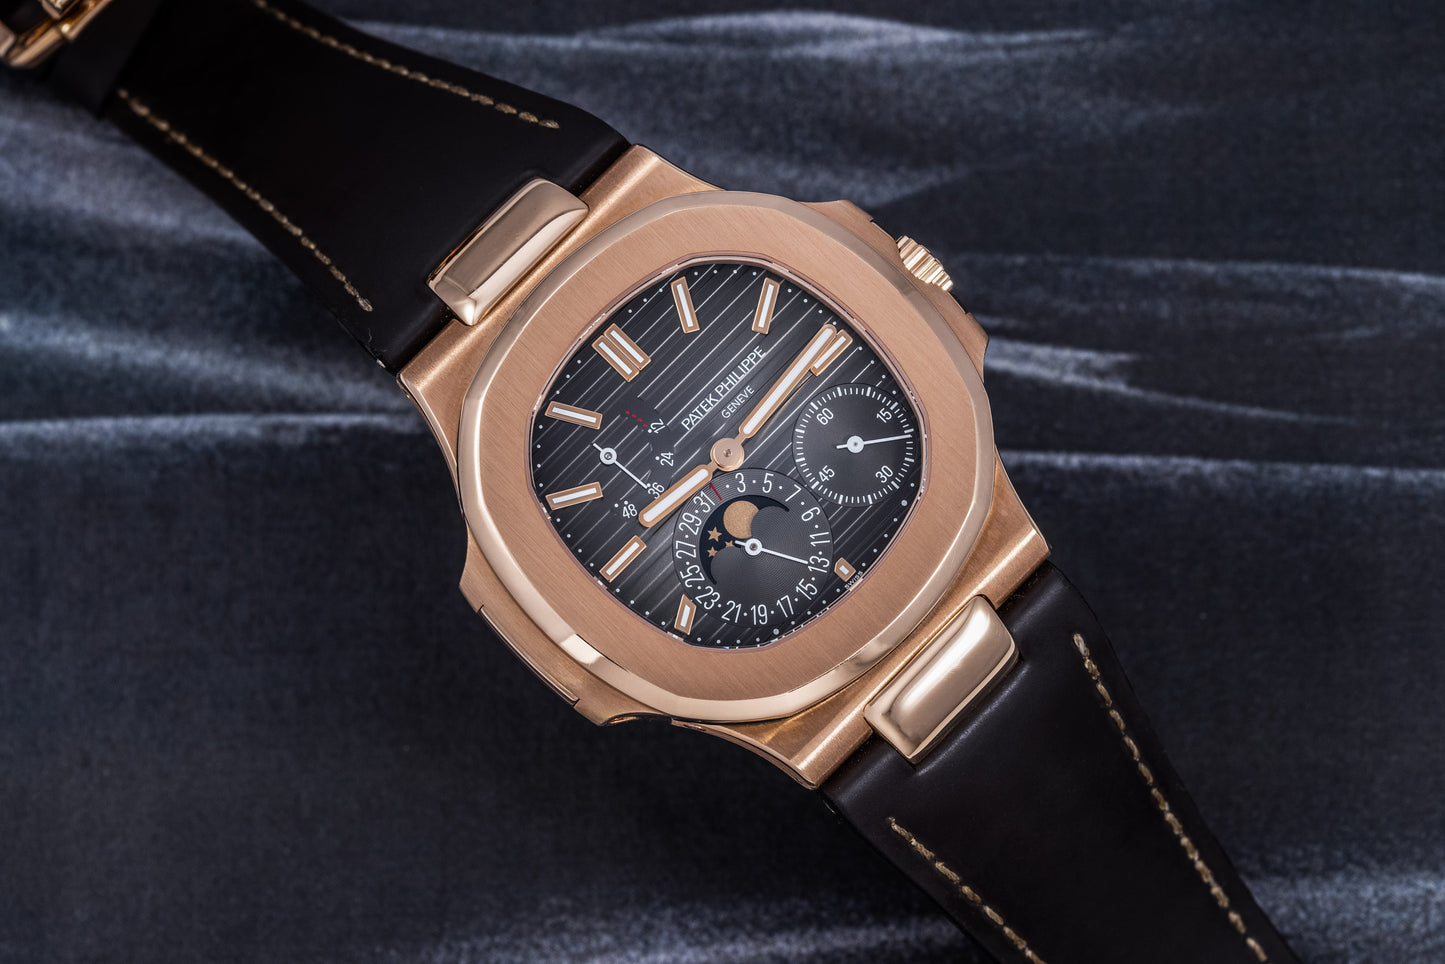 Patek Philippe Nautilus Power Reserve, Date, And Moonphases